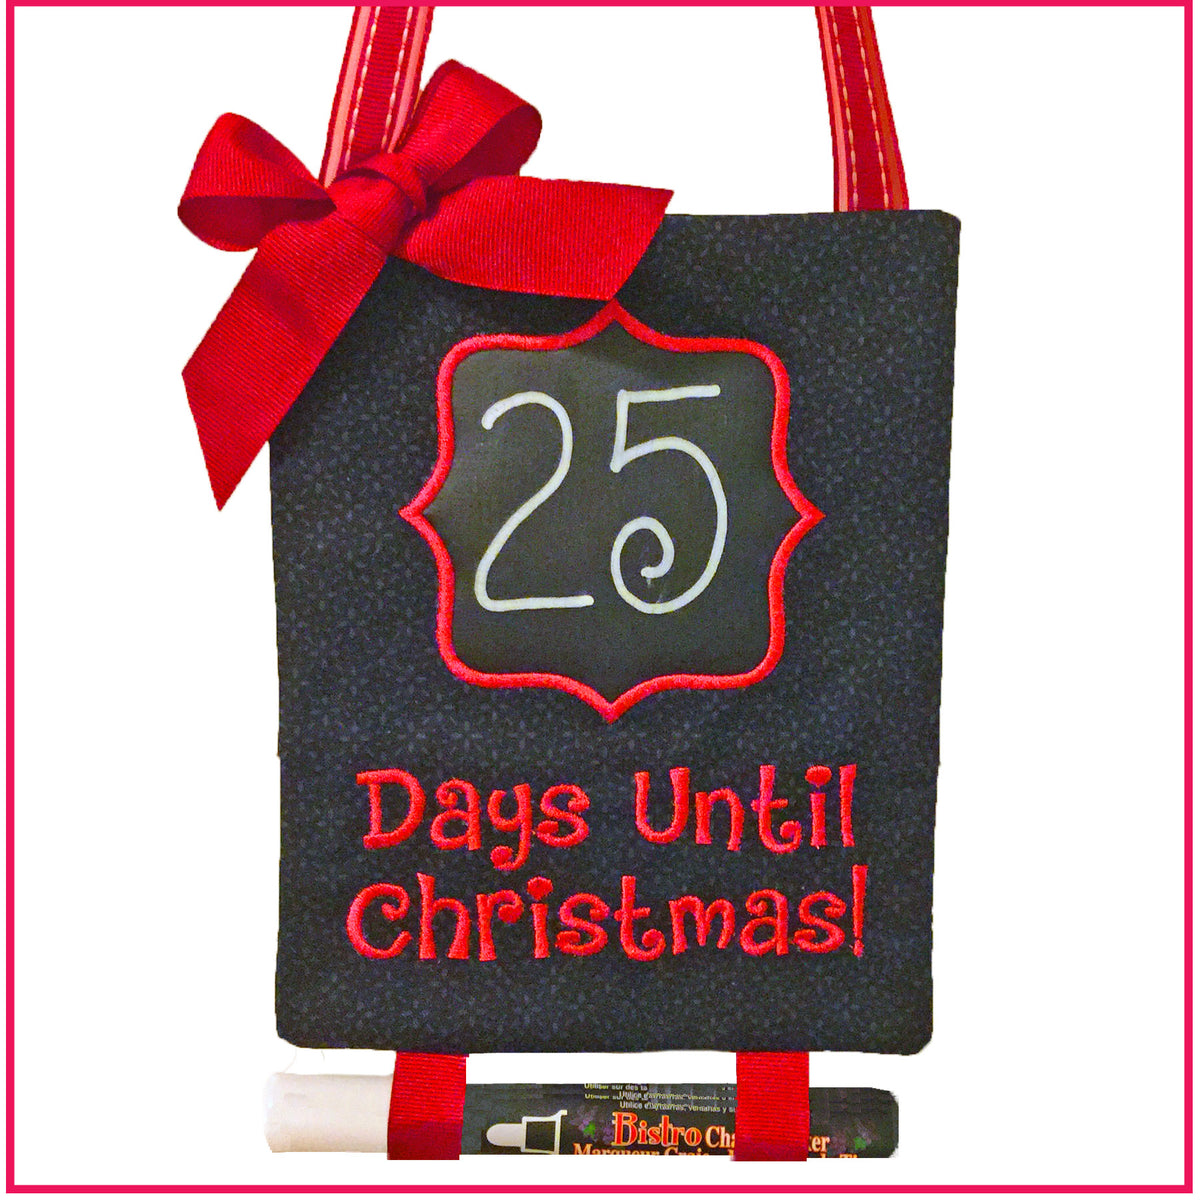 Countdown to Christmas advent calendar in the hoop embroidery design